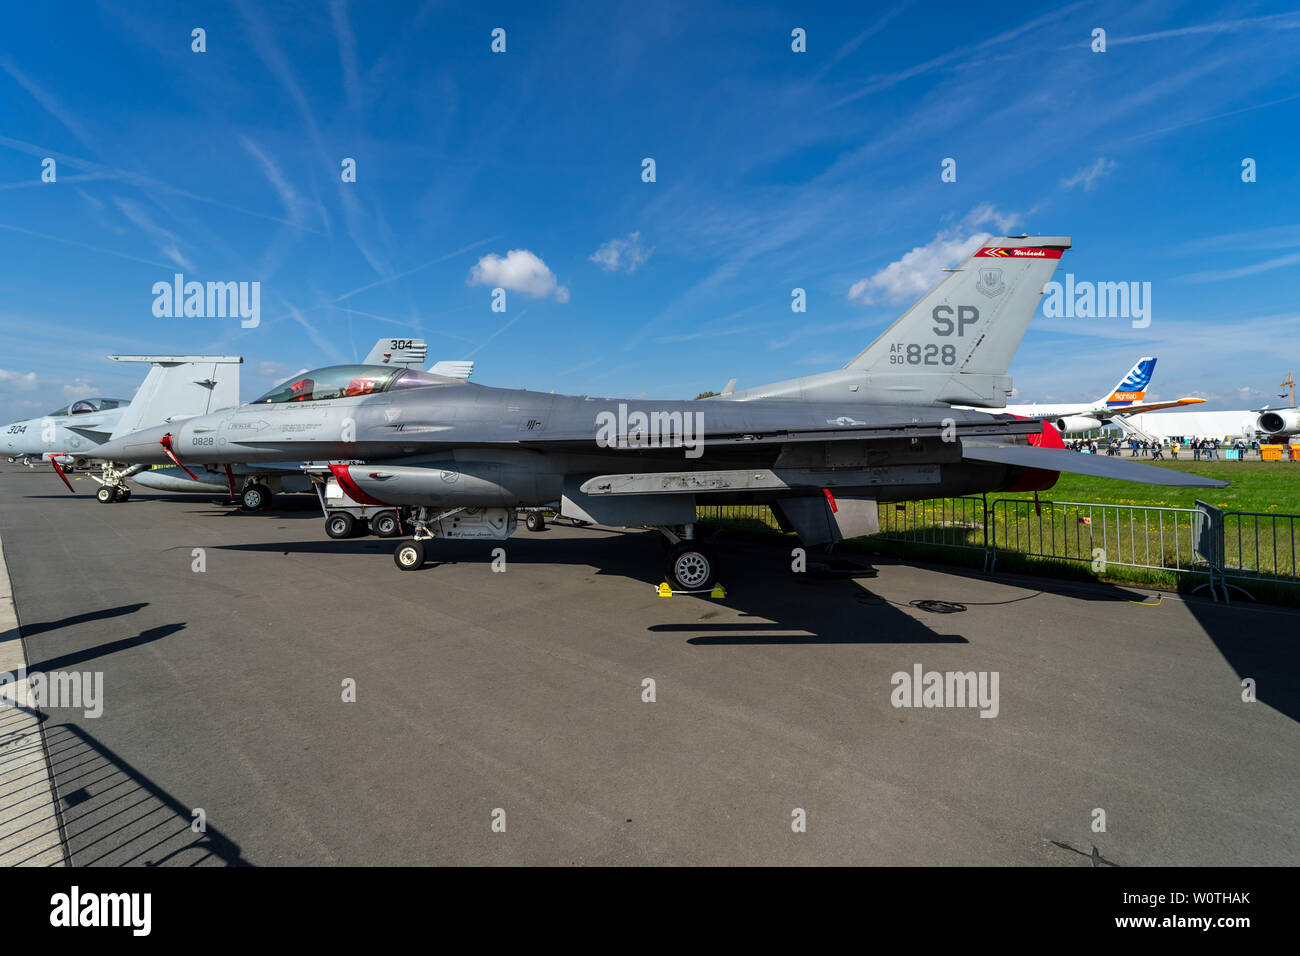 BERLIN - APRIL 27, 2018: Multirole fighter, air superiority fighter General Dynamics F-16 Fighting Falcon. US Air Force. Exhibition ILA Berlin Air Show 2018. Stock Photo